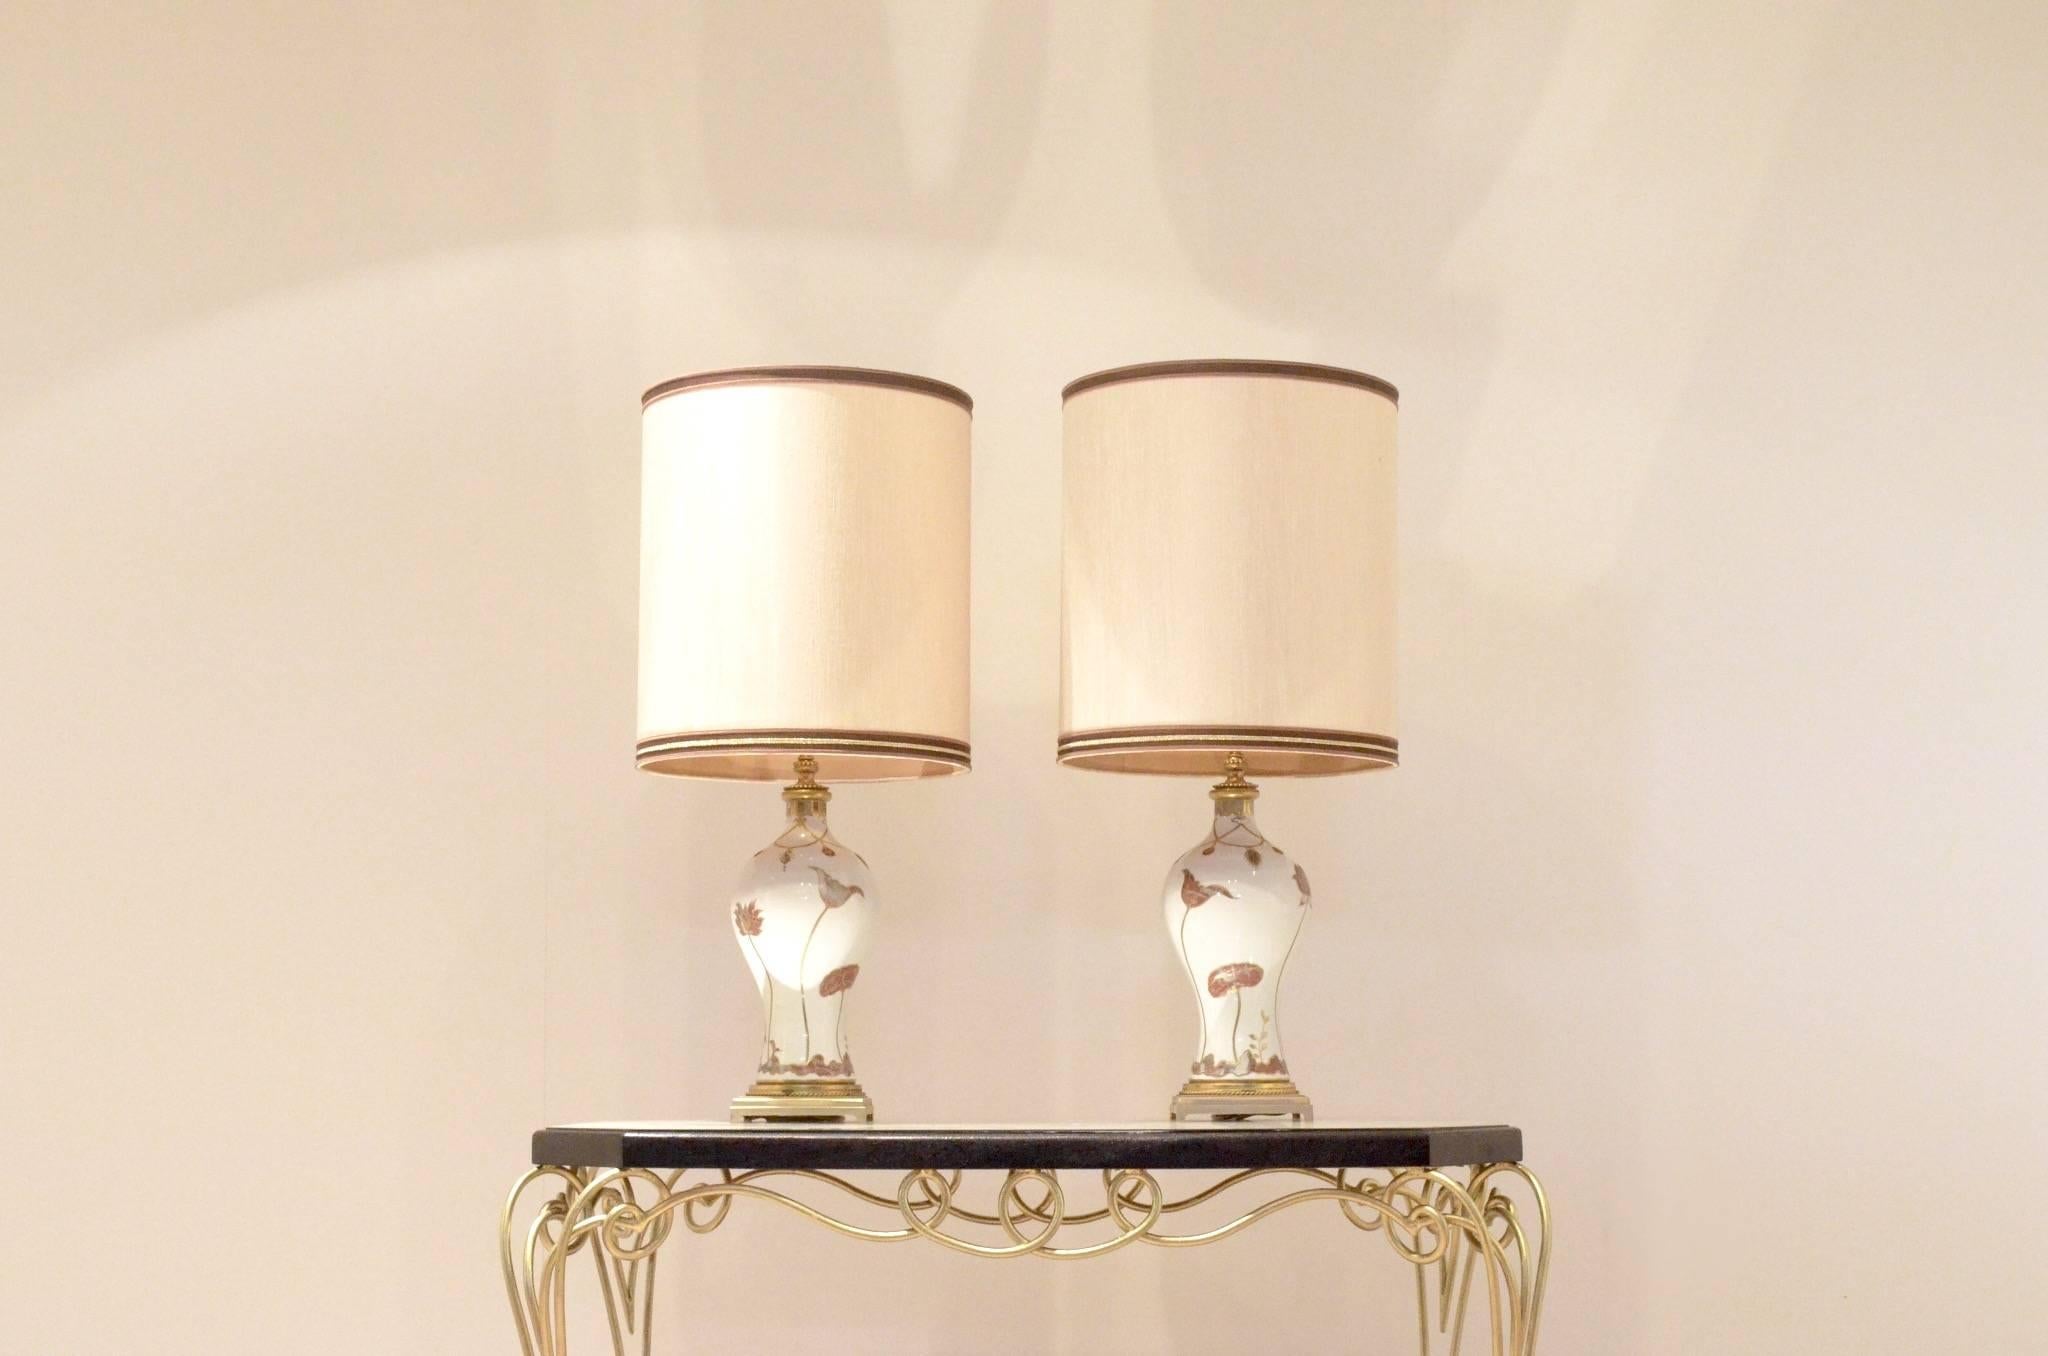 Pair of French Table Lamps in Bronze and Porcelain by Manufacture De Sèvres im Angebot 2